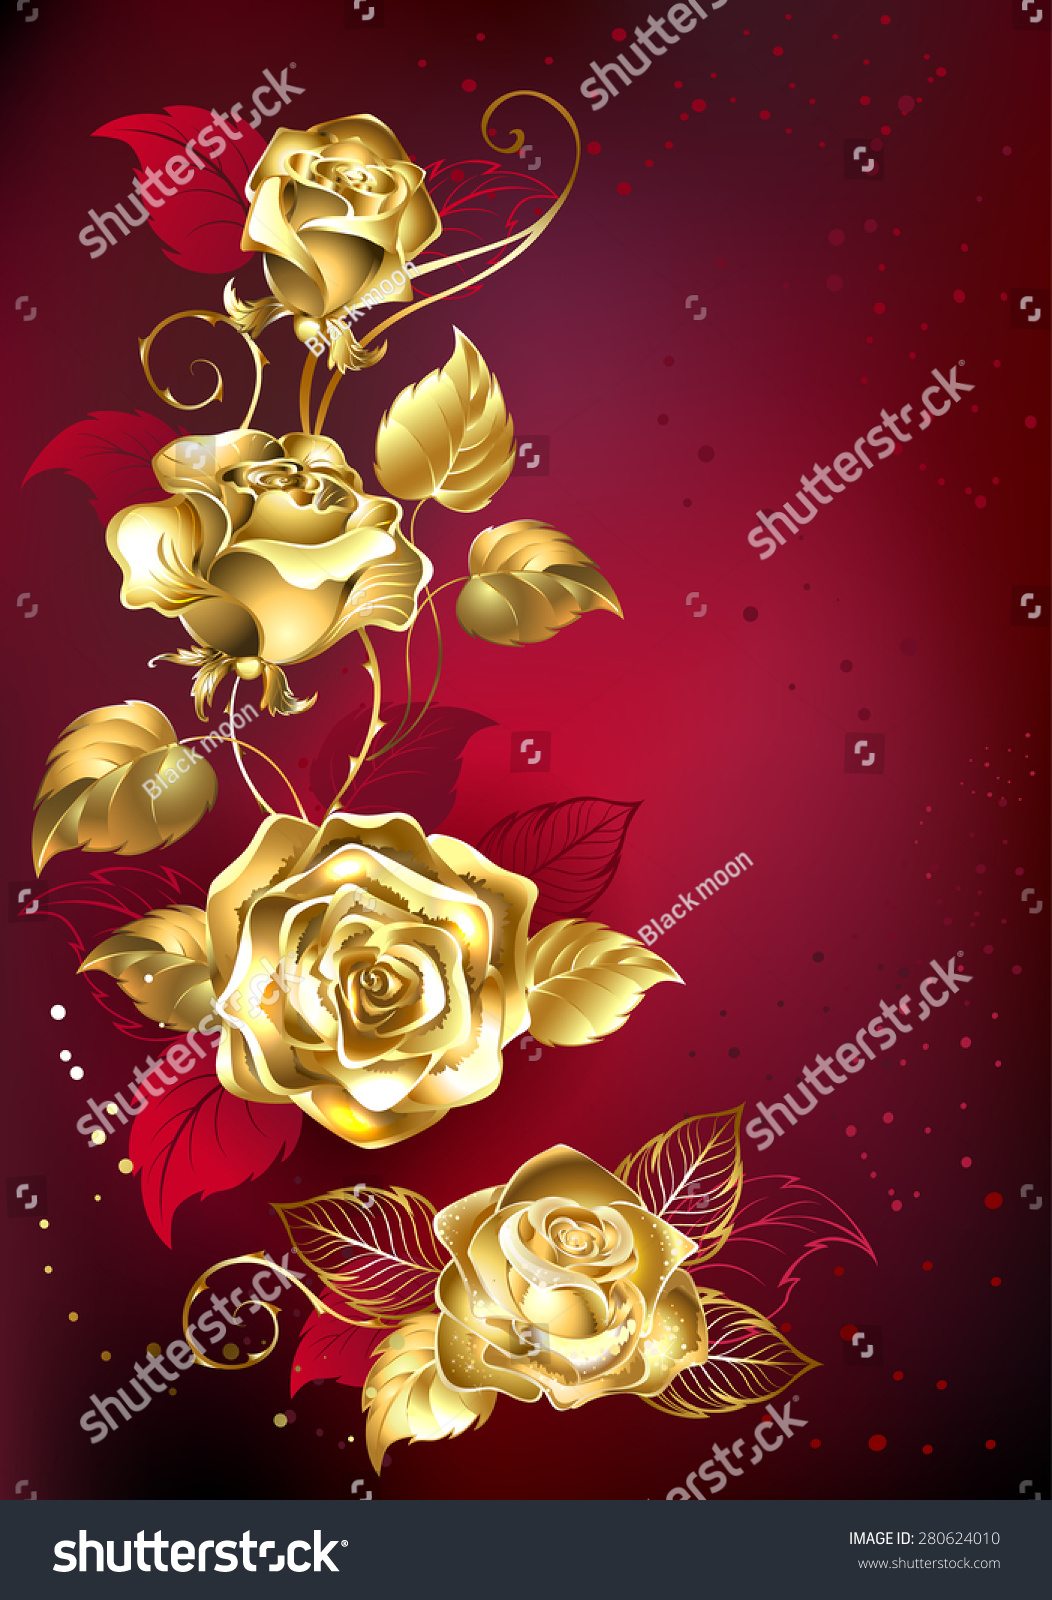 SVG of Gold entwined roses on red textural background. svg